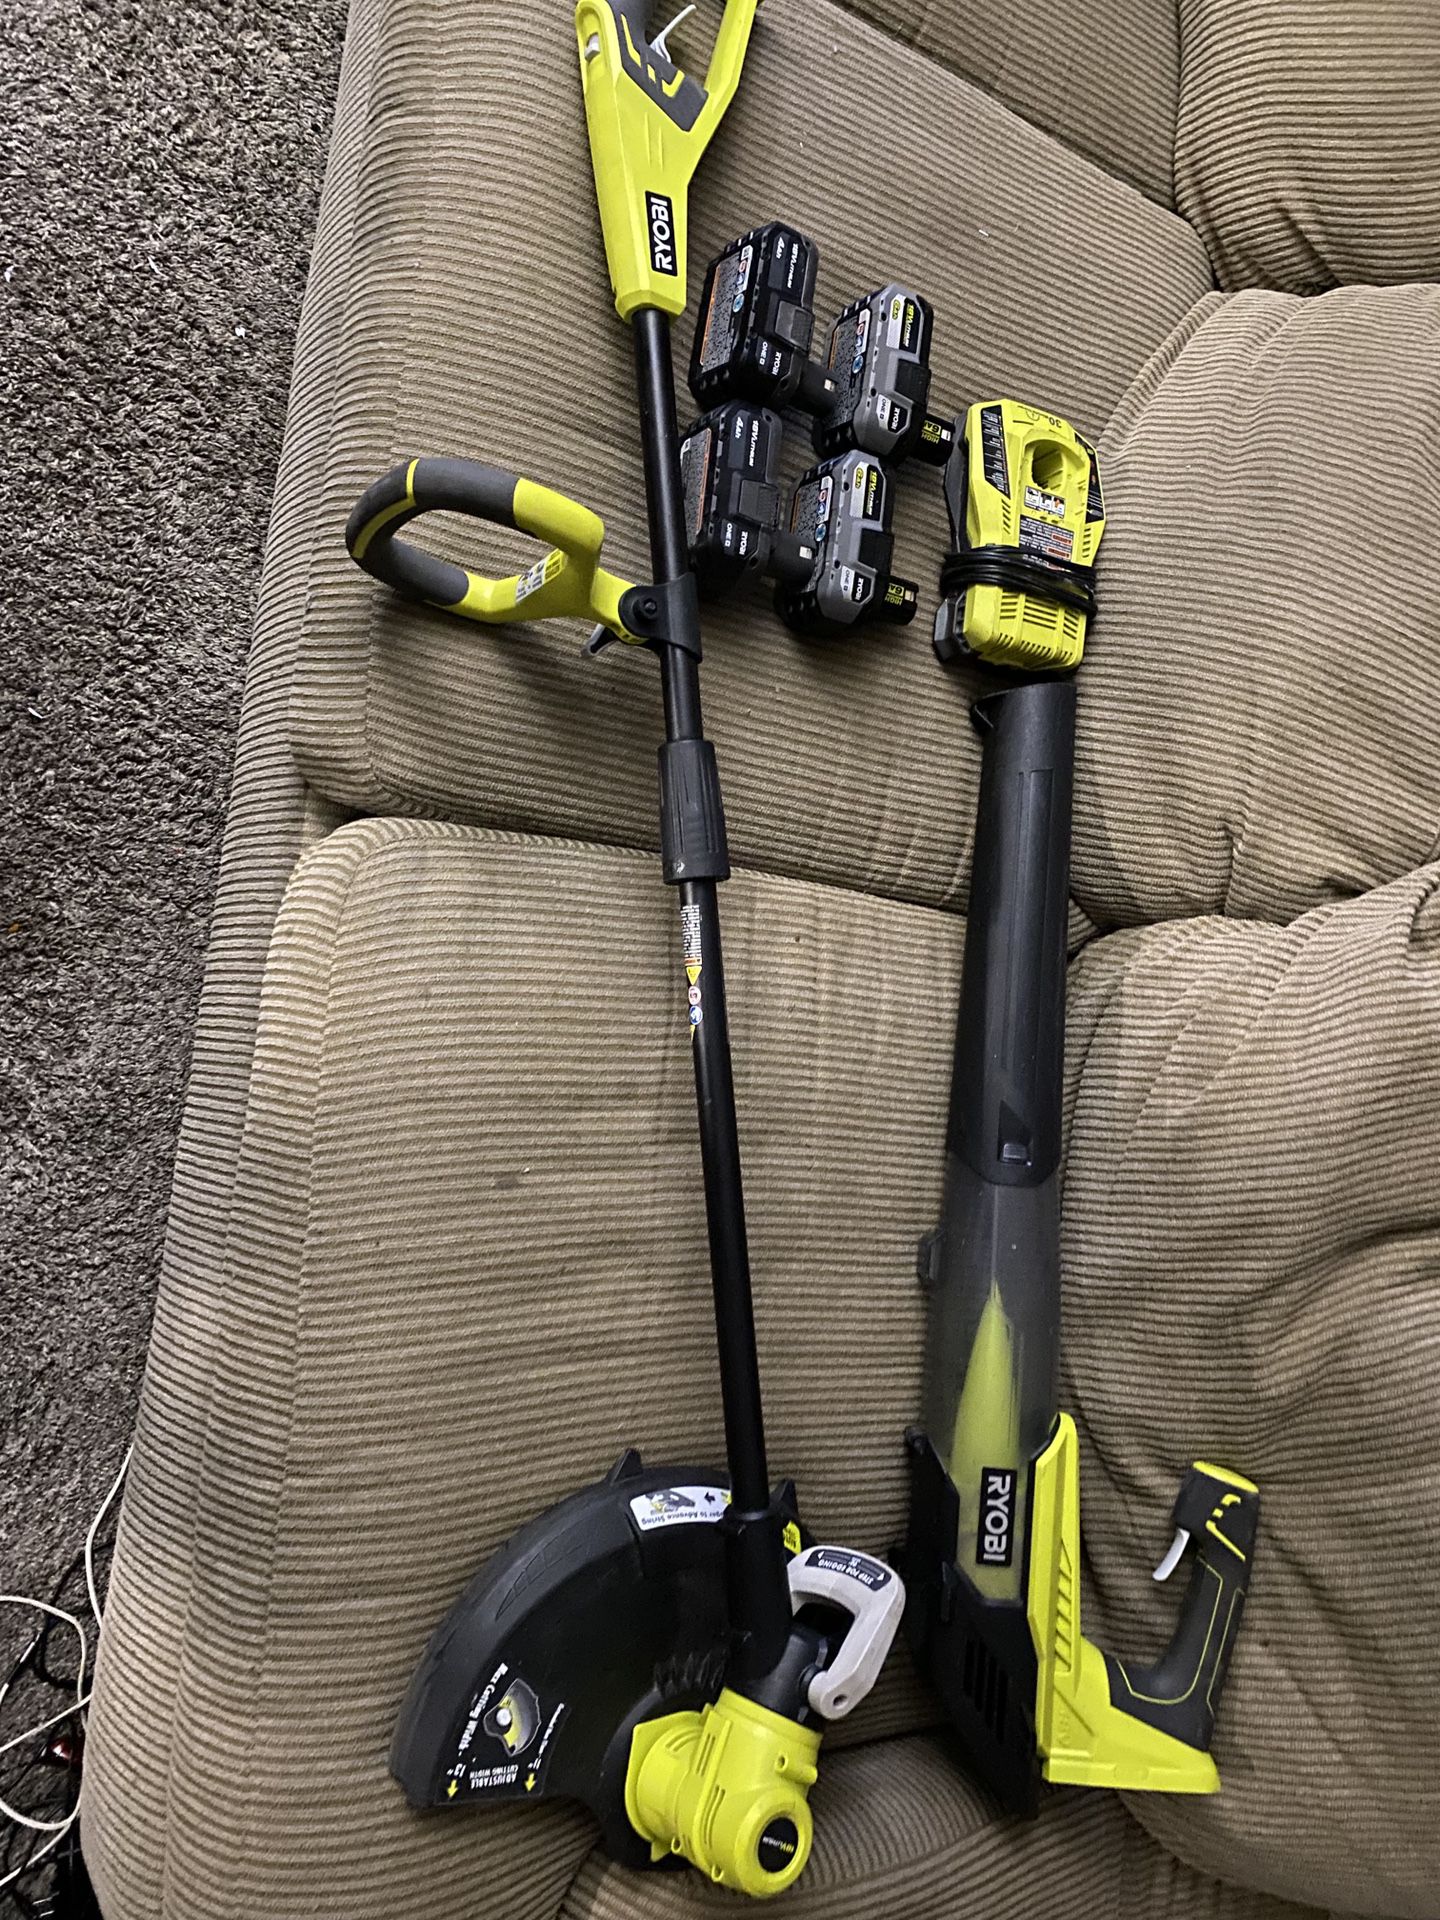 18 V LITHIUM CORDLESS RYOBI TRIMMER AND BLOWER  PACKAGE 